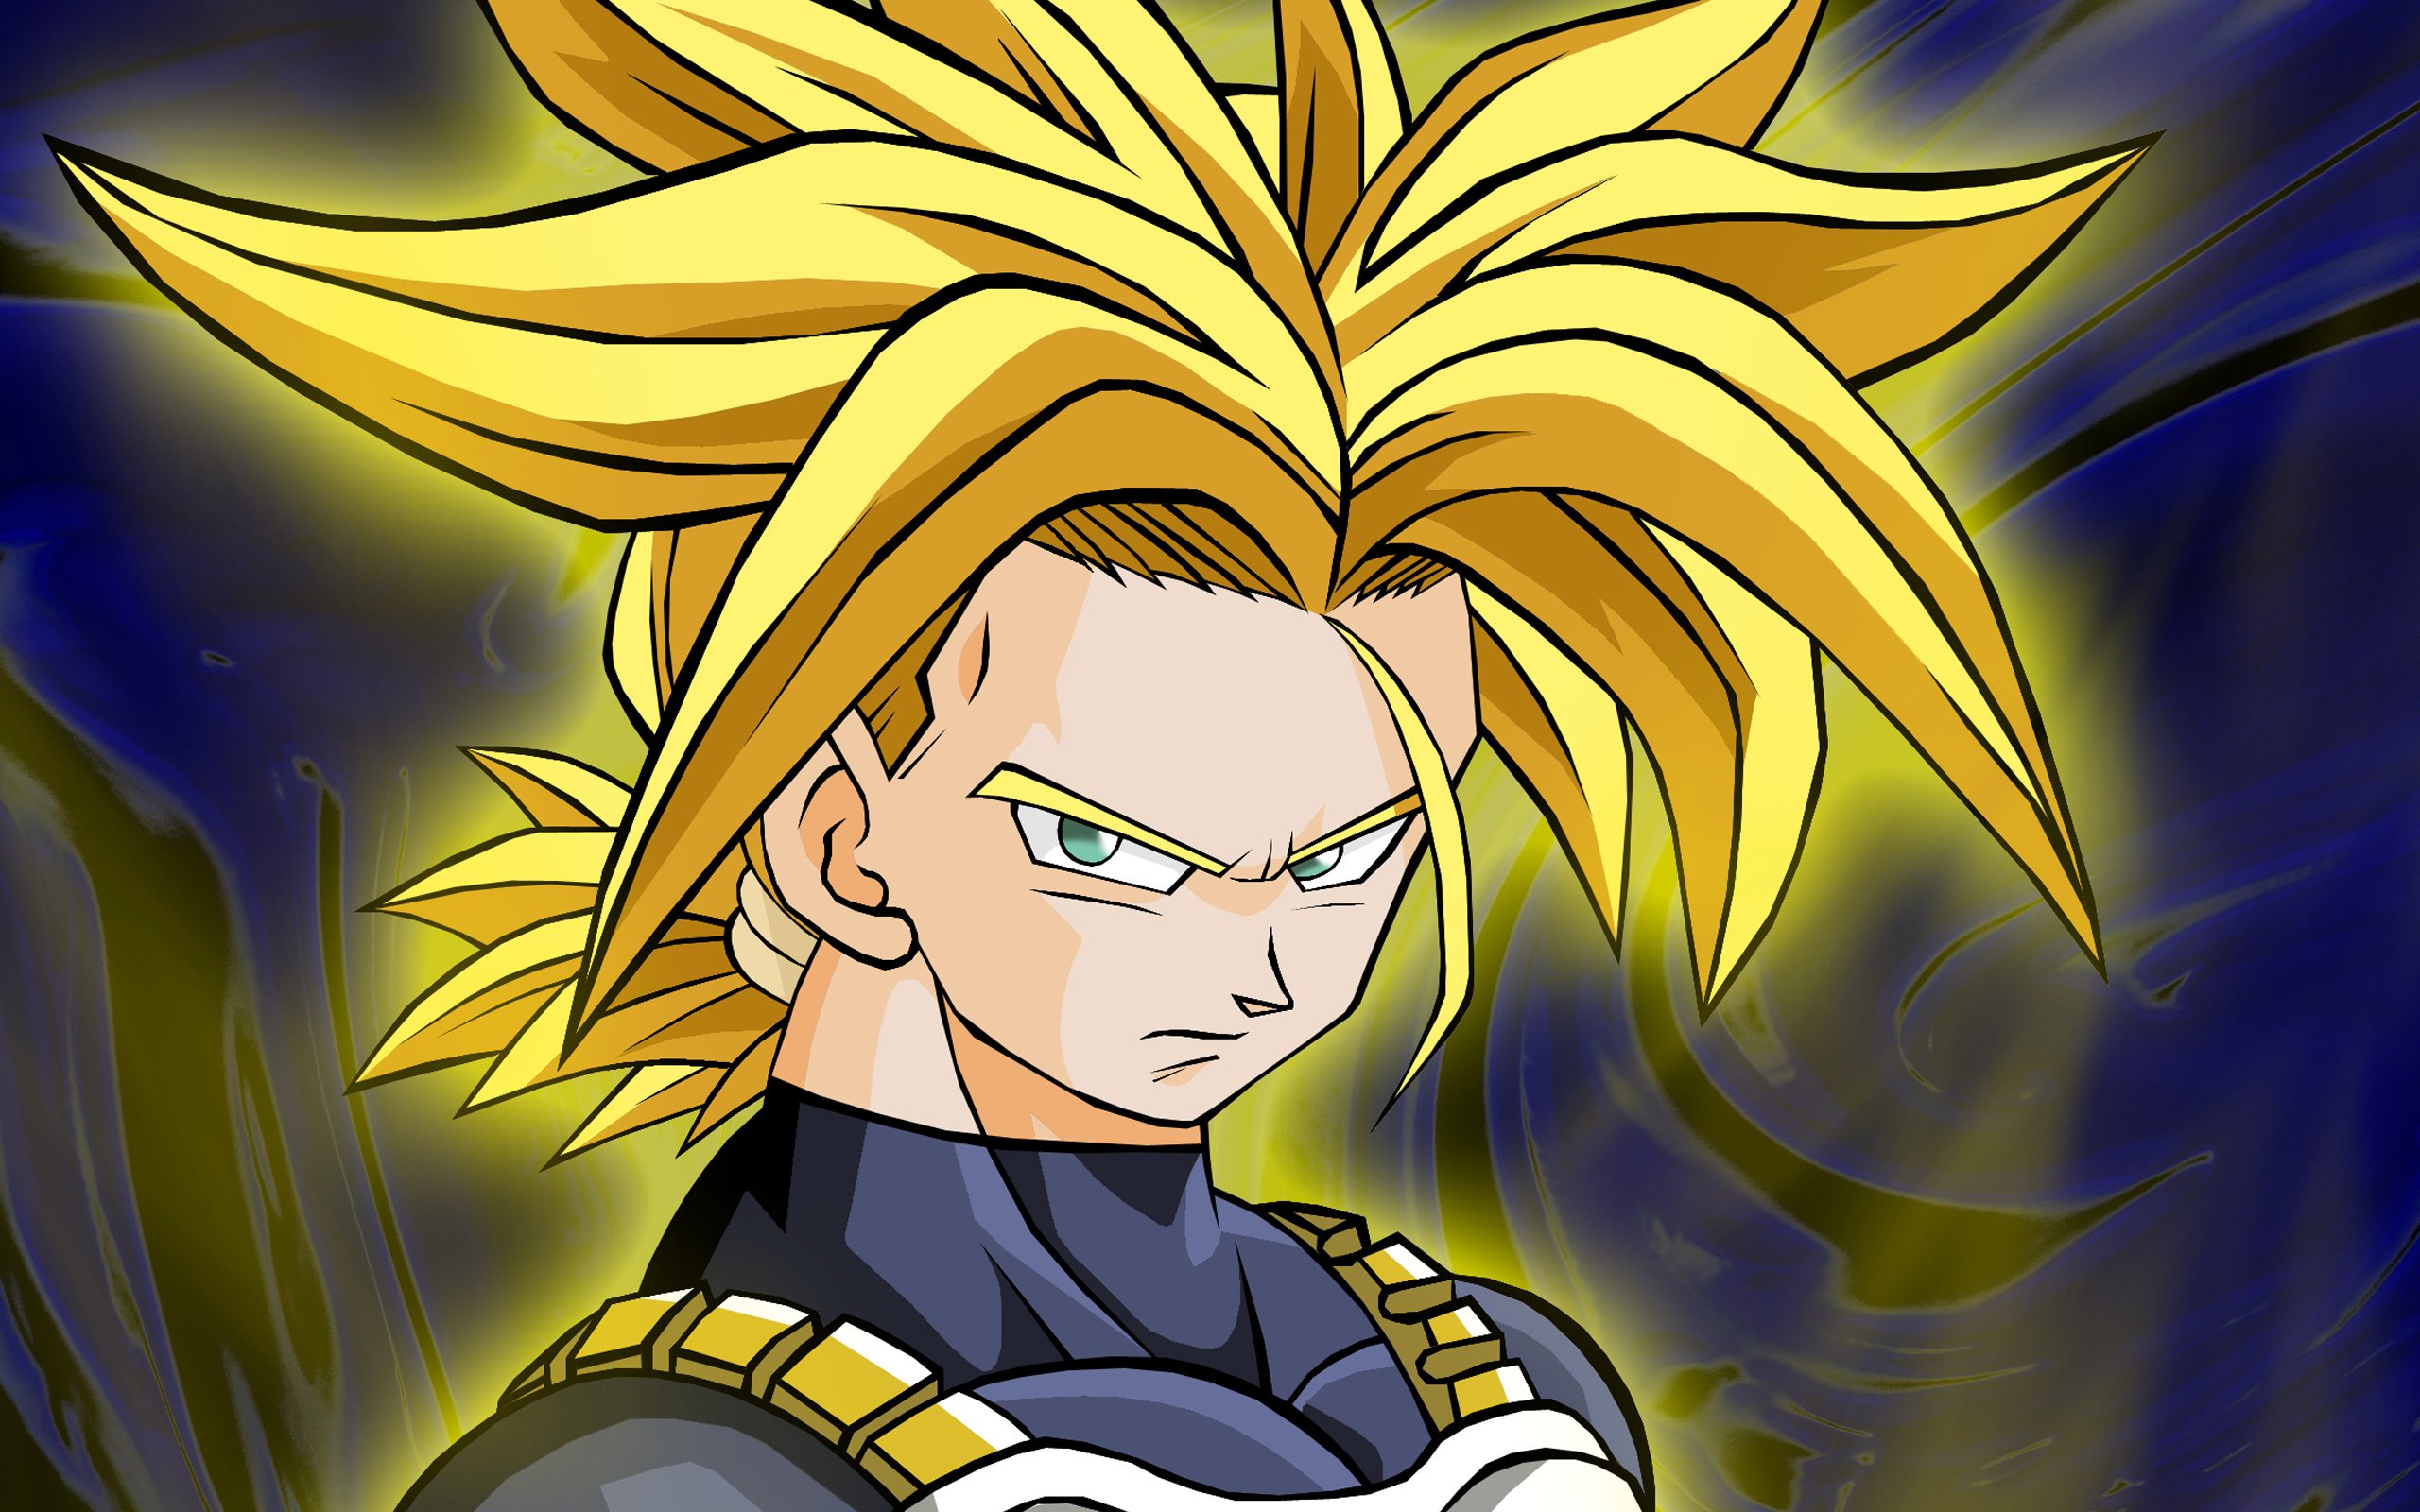 Download wallpapers Trunks Briefs, Dragon Ball Z, fire, DBZ, Super Saiyan,  manga, Dragon Ball for desktop with resolution 2560x1600. High Quality HD  pictures wallpapers